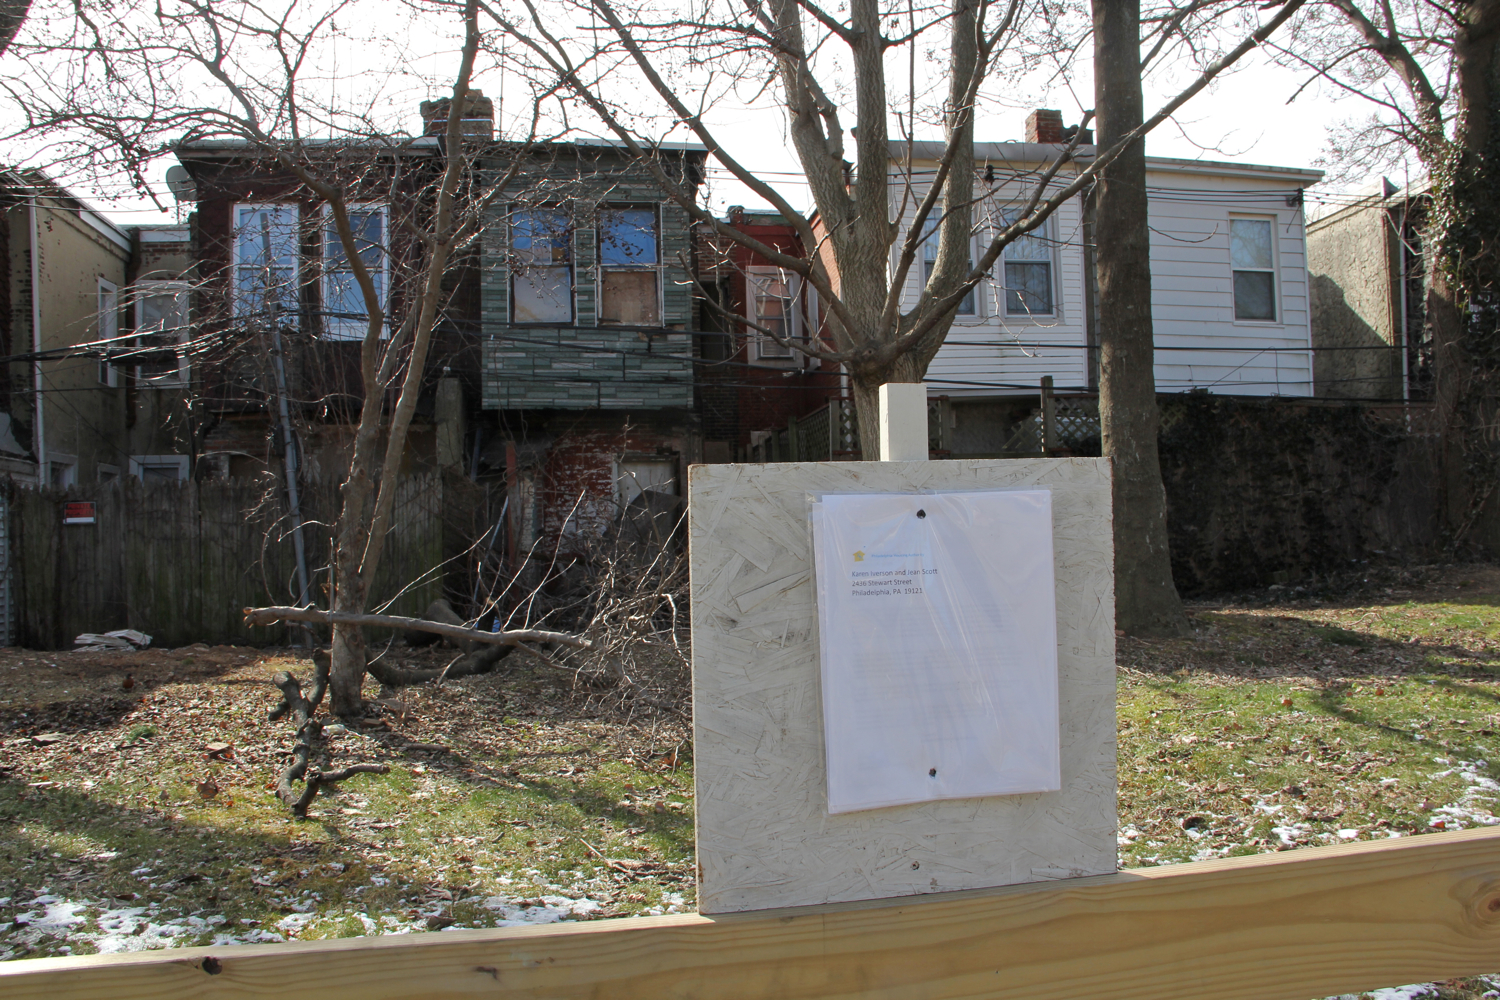 Vacant property condemnation by eminent domain, Sharswood, February, 2016 | Emma Lee/WHYY